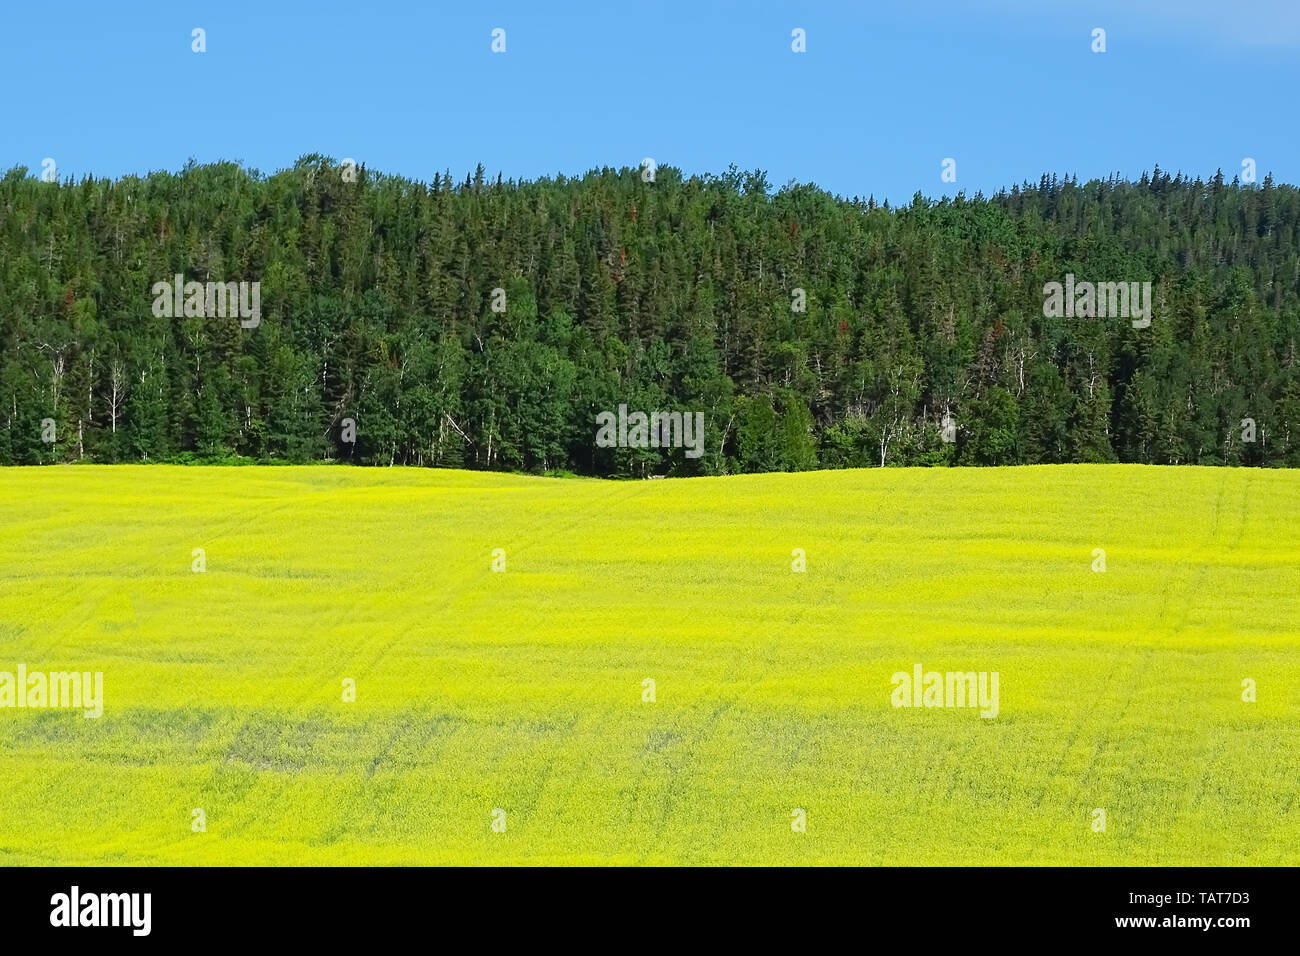 Fluorescent yellow canola (rapeseed) fields in Quebec, Canada. Stock Photo